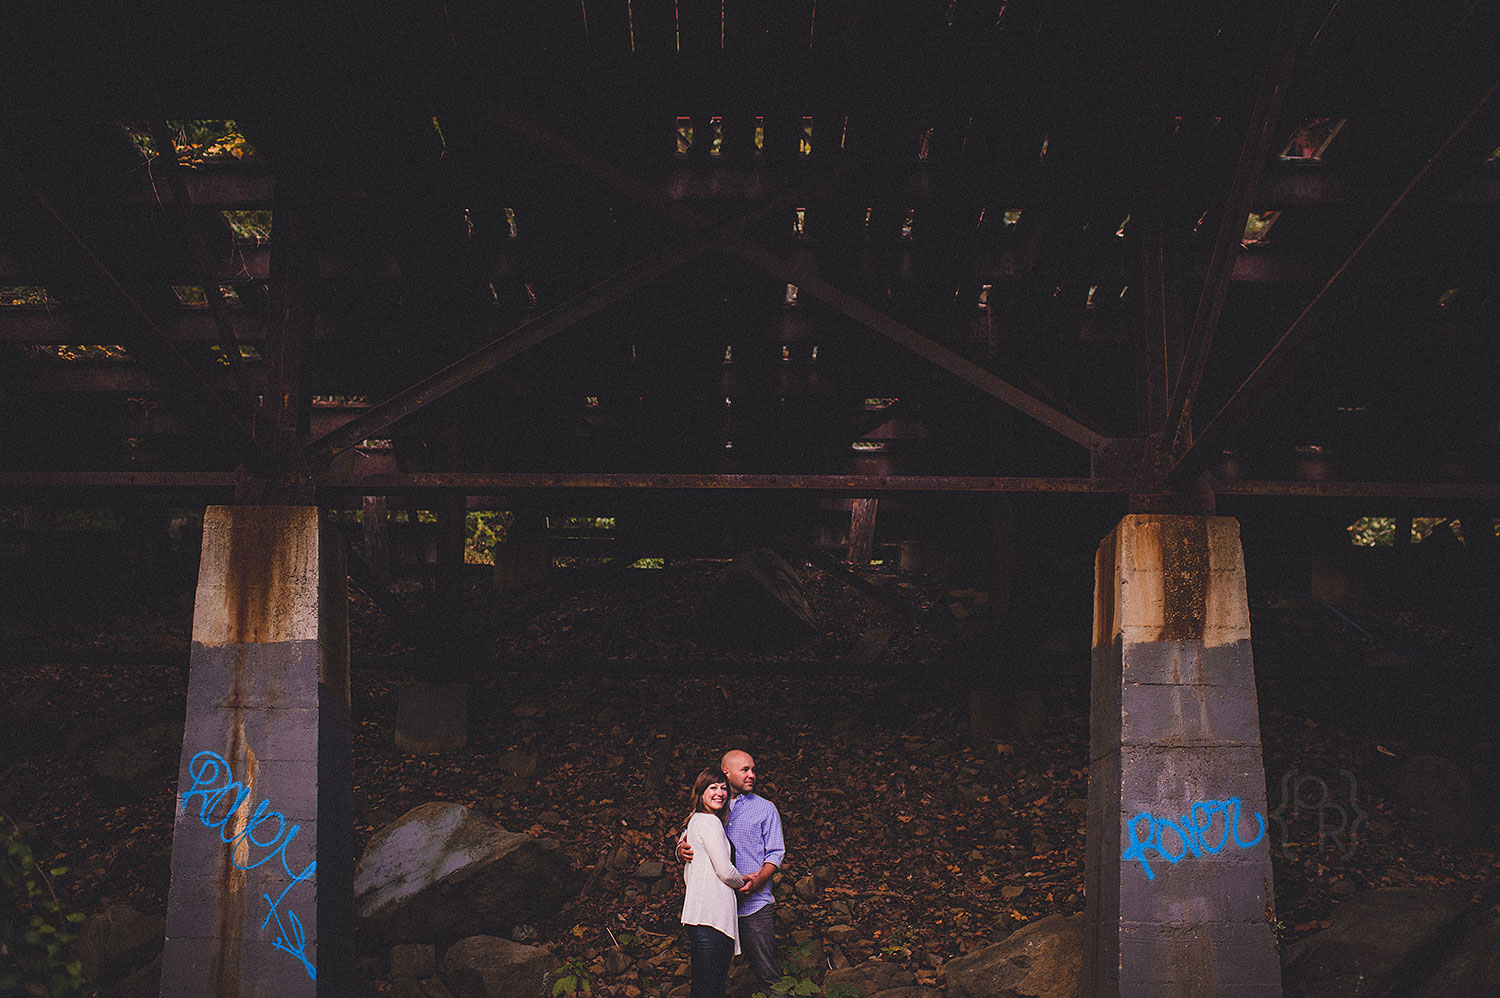 pat-robinson-photography-wilmington-engagement-session-20-2.jpg